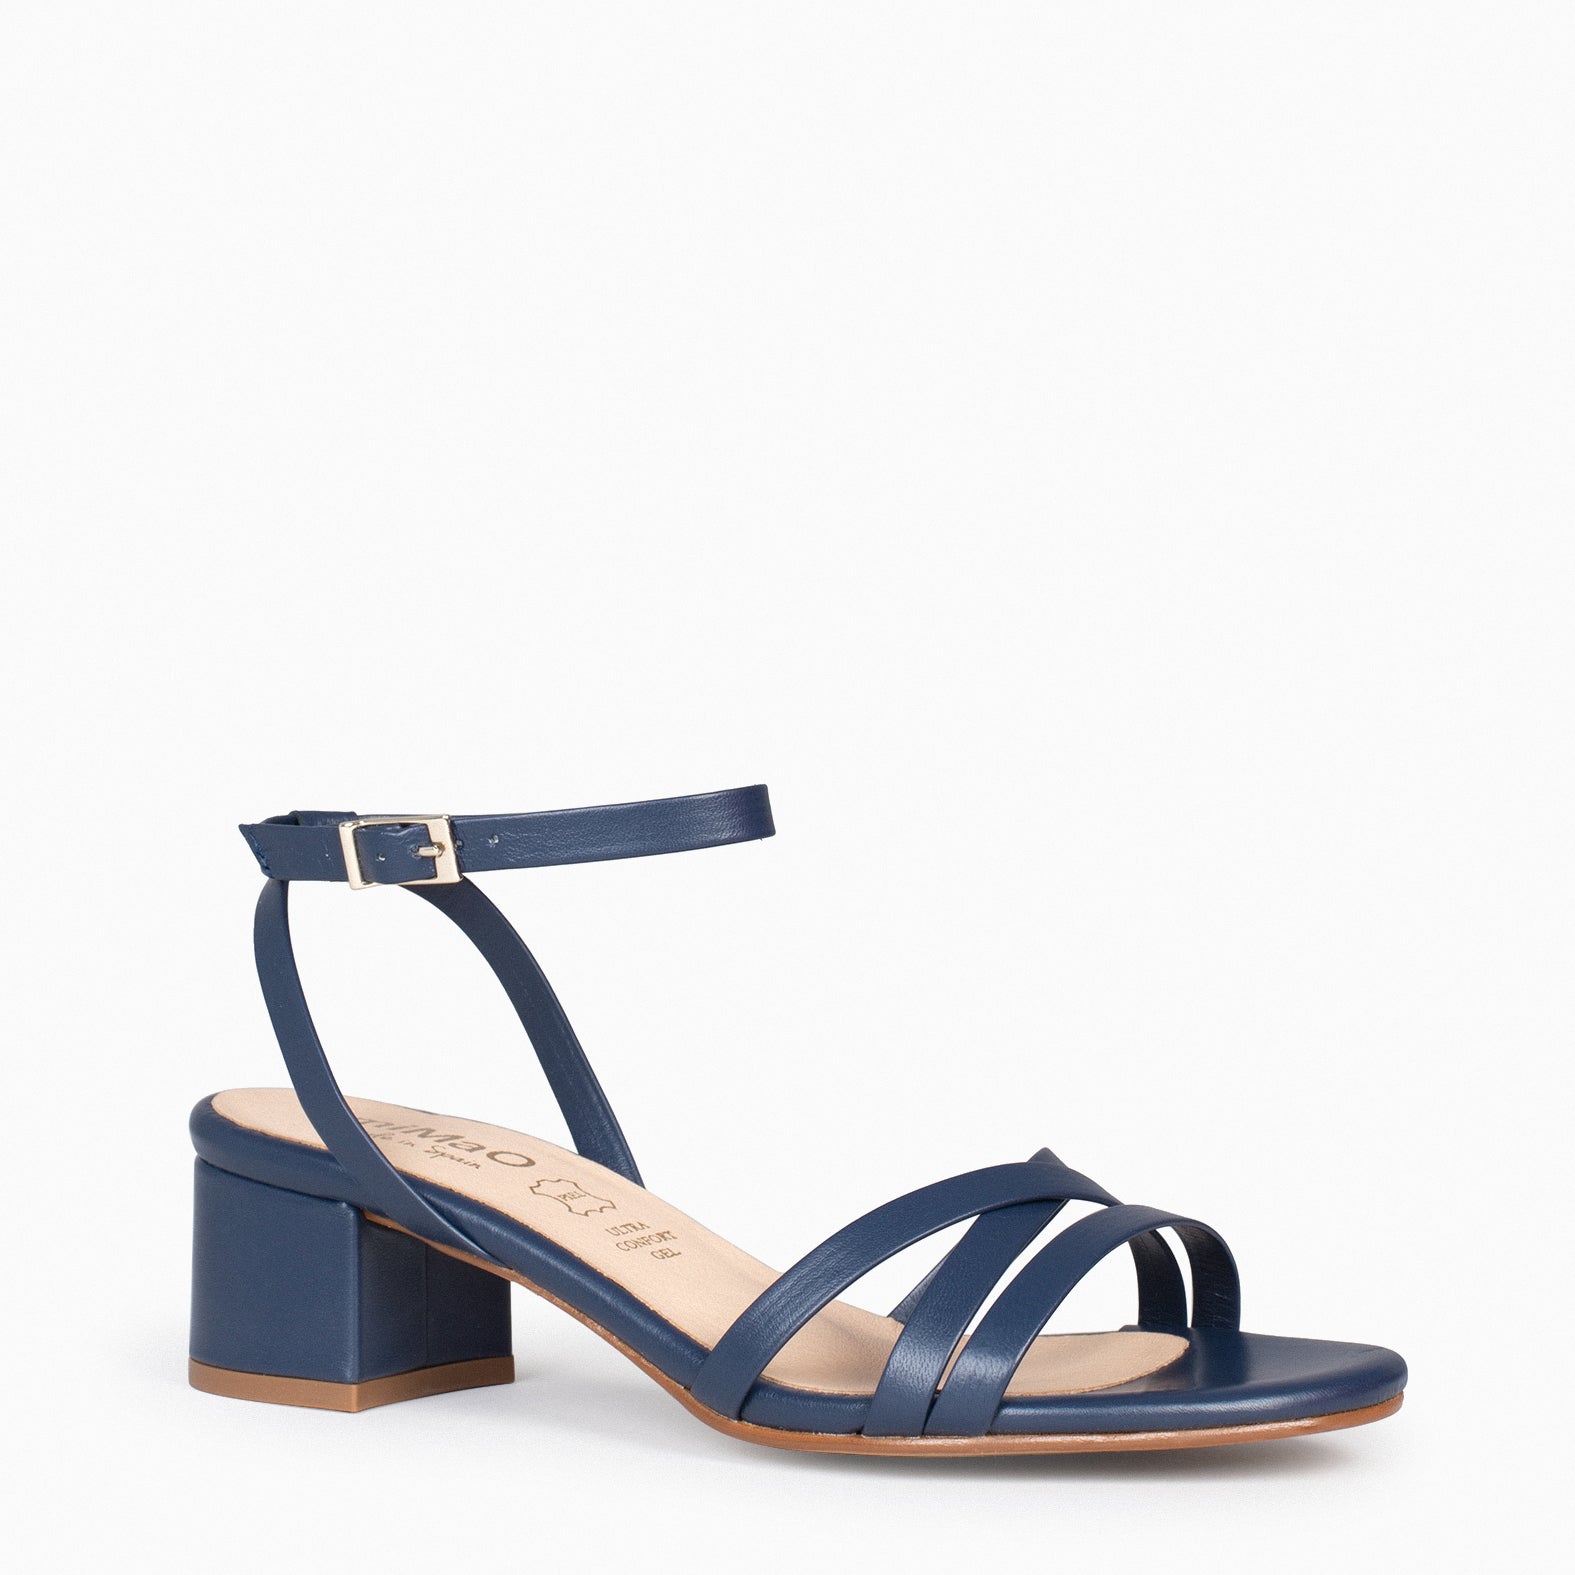 VIENA – NAVY SANDAL WITH THIN STRAPS AND LOW HEEL